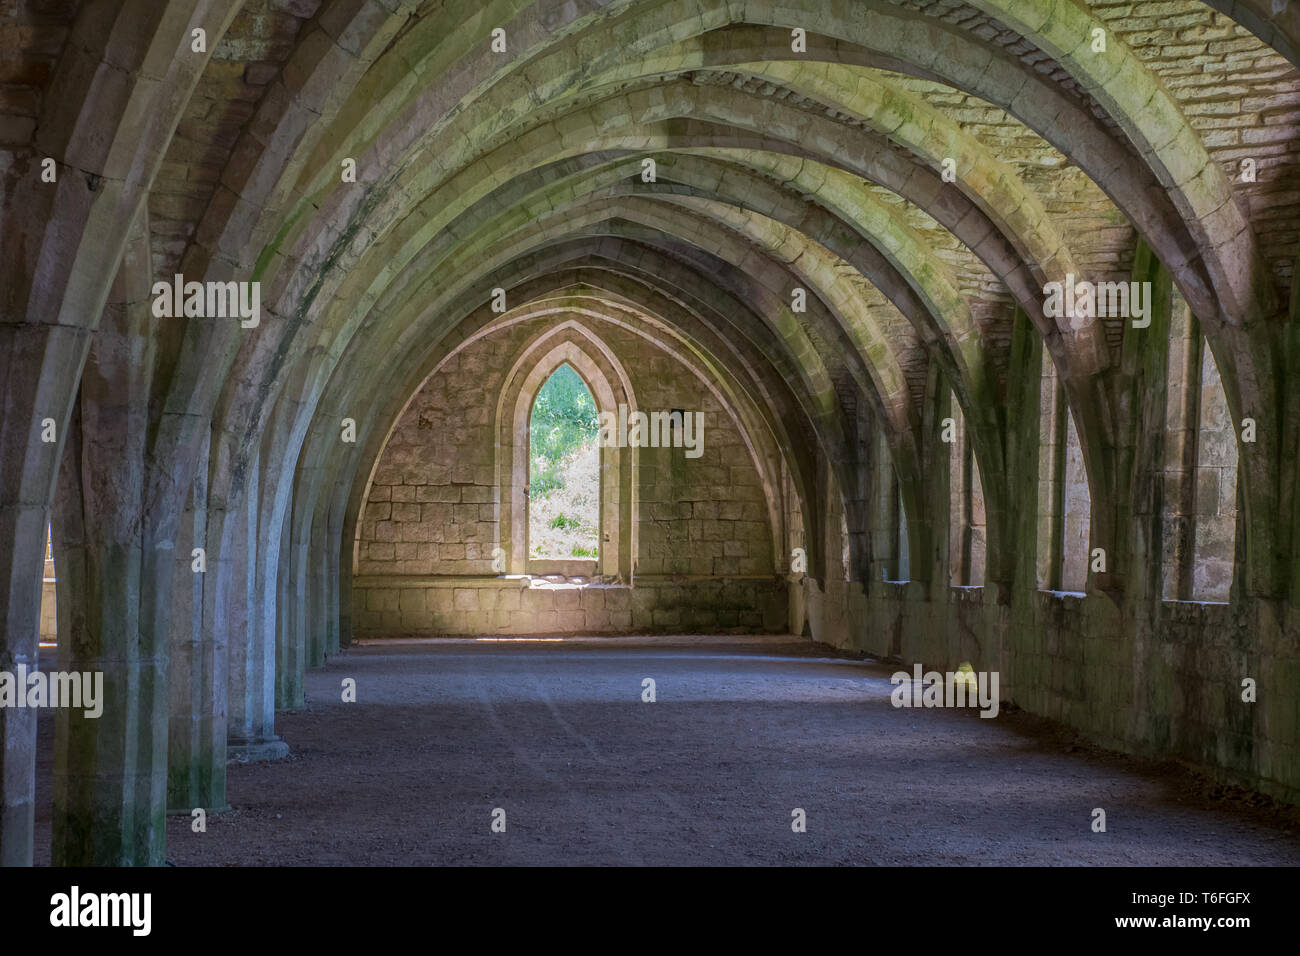 Ancient corridor in monastery with arches Stock Photo